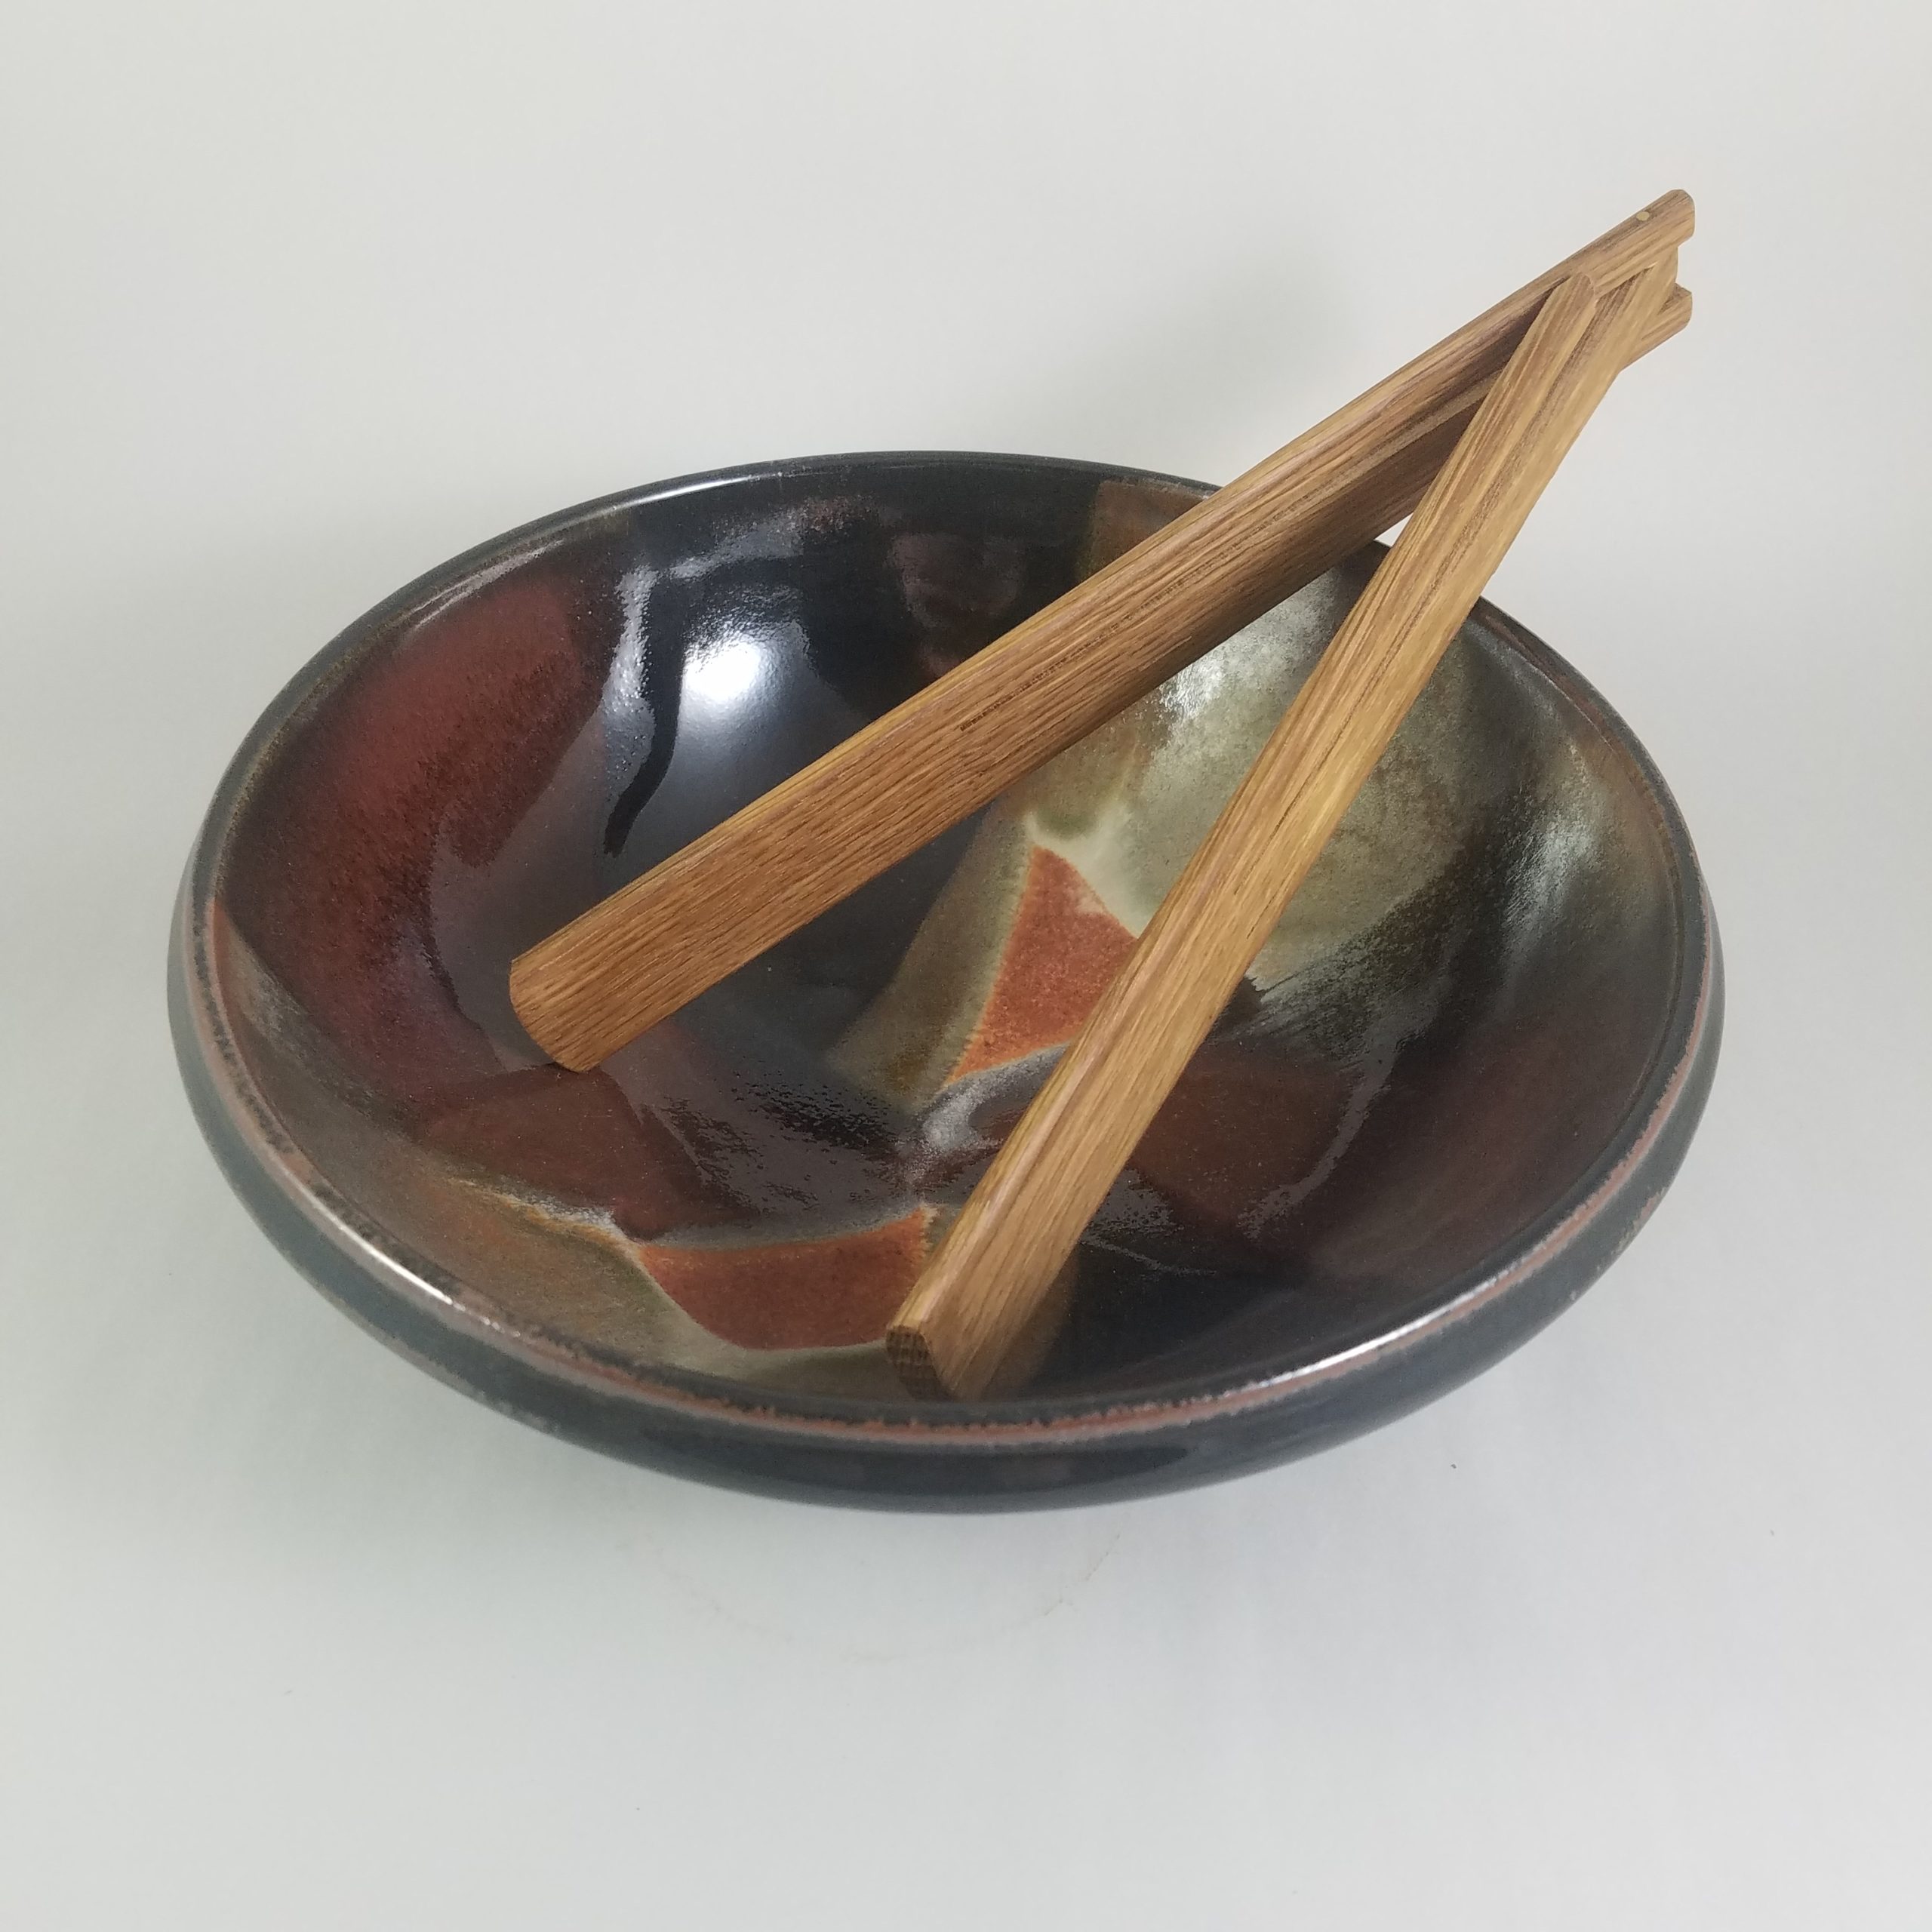 Clay Coyote Salad Bowl (Shallow)